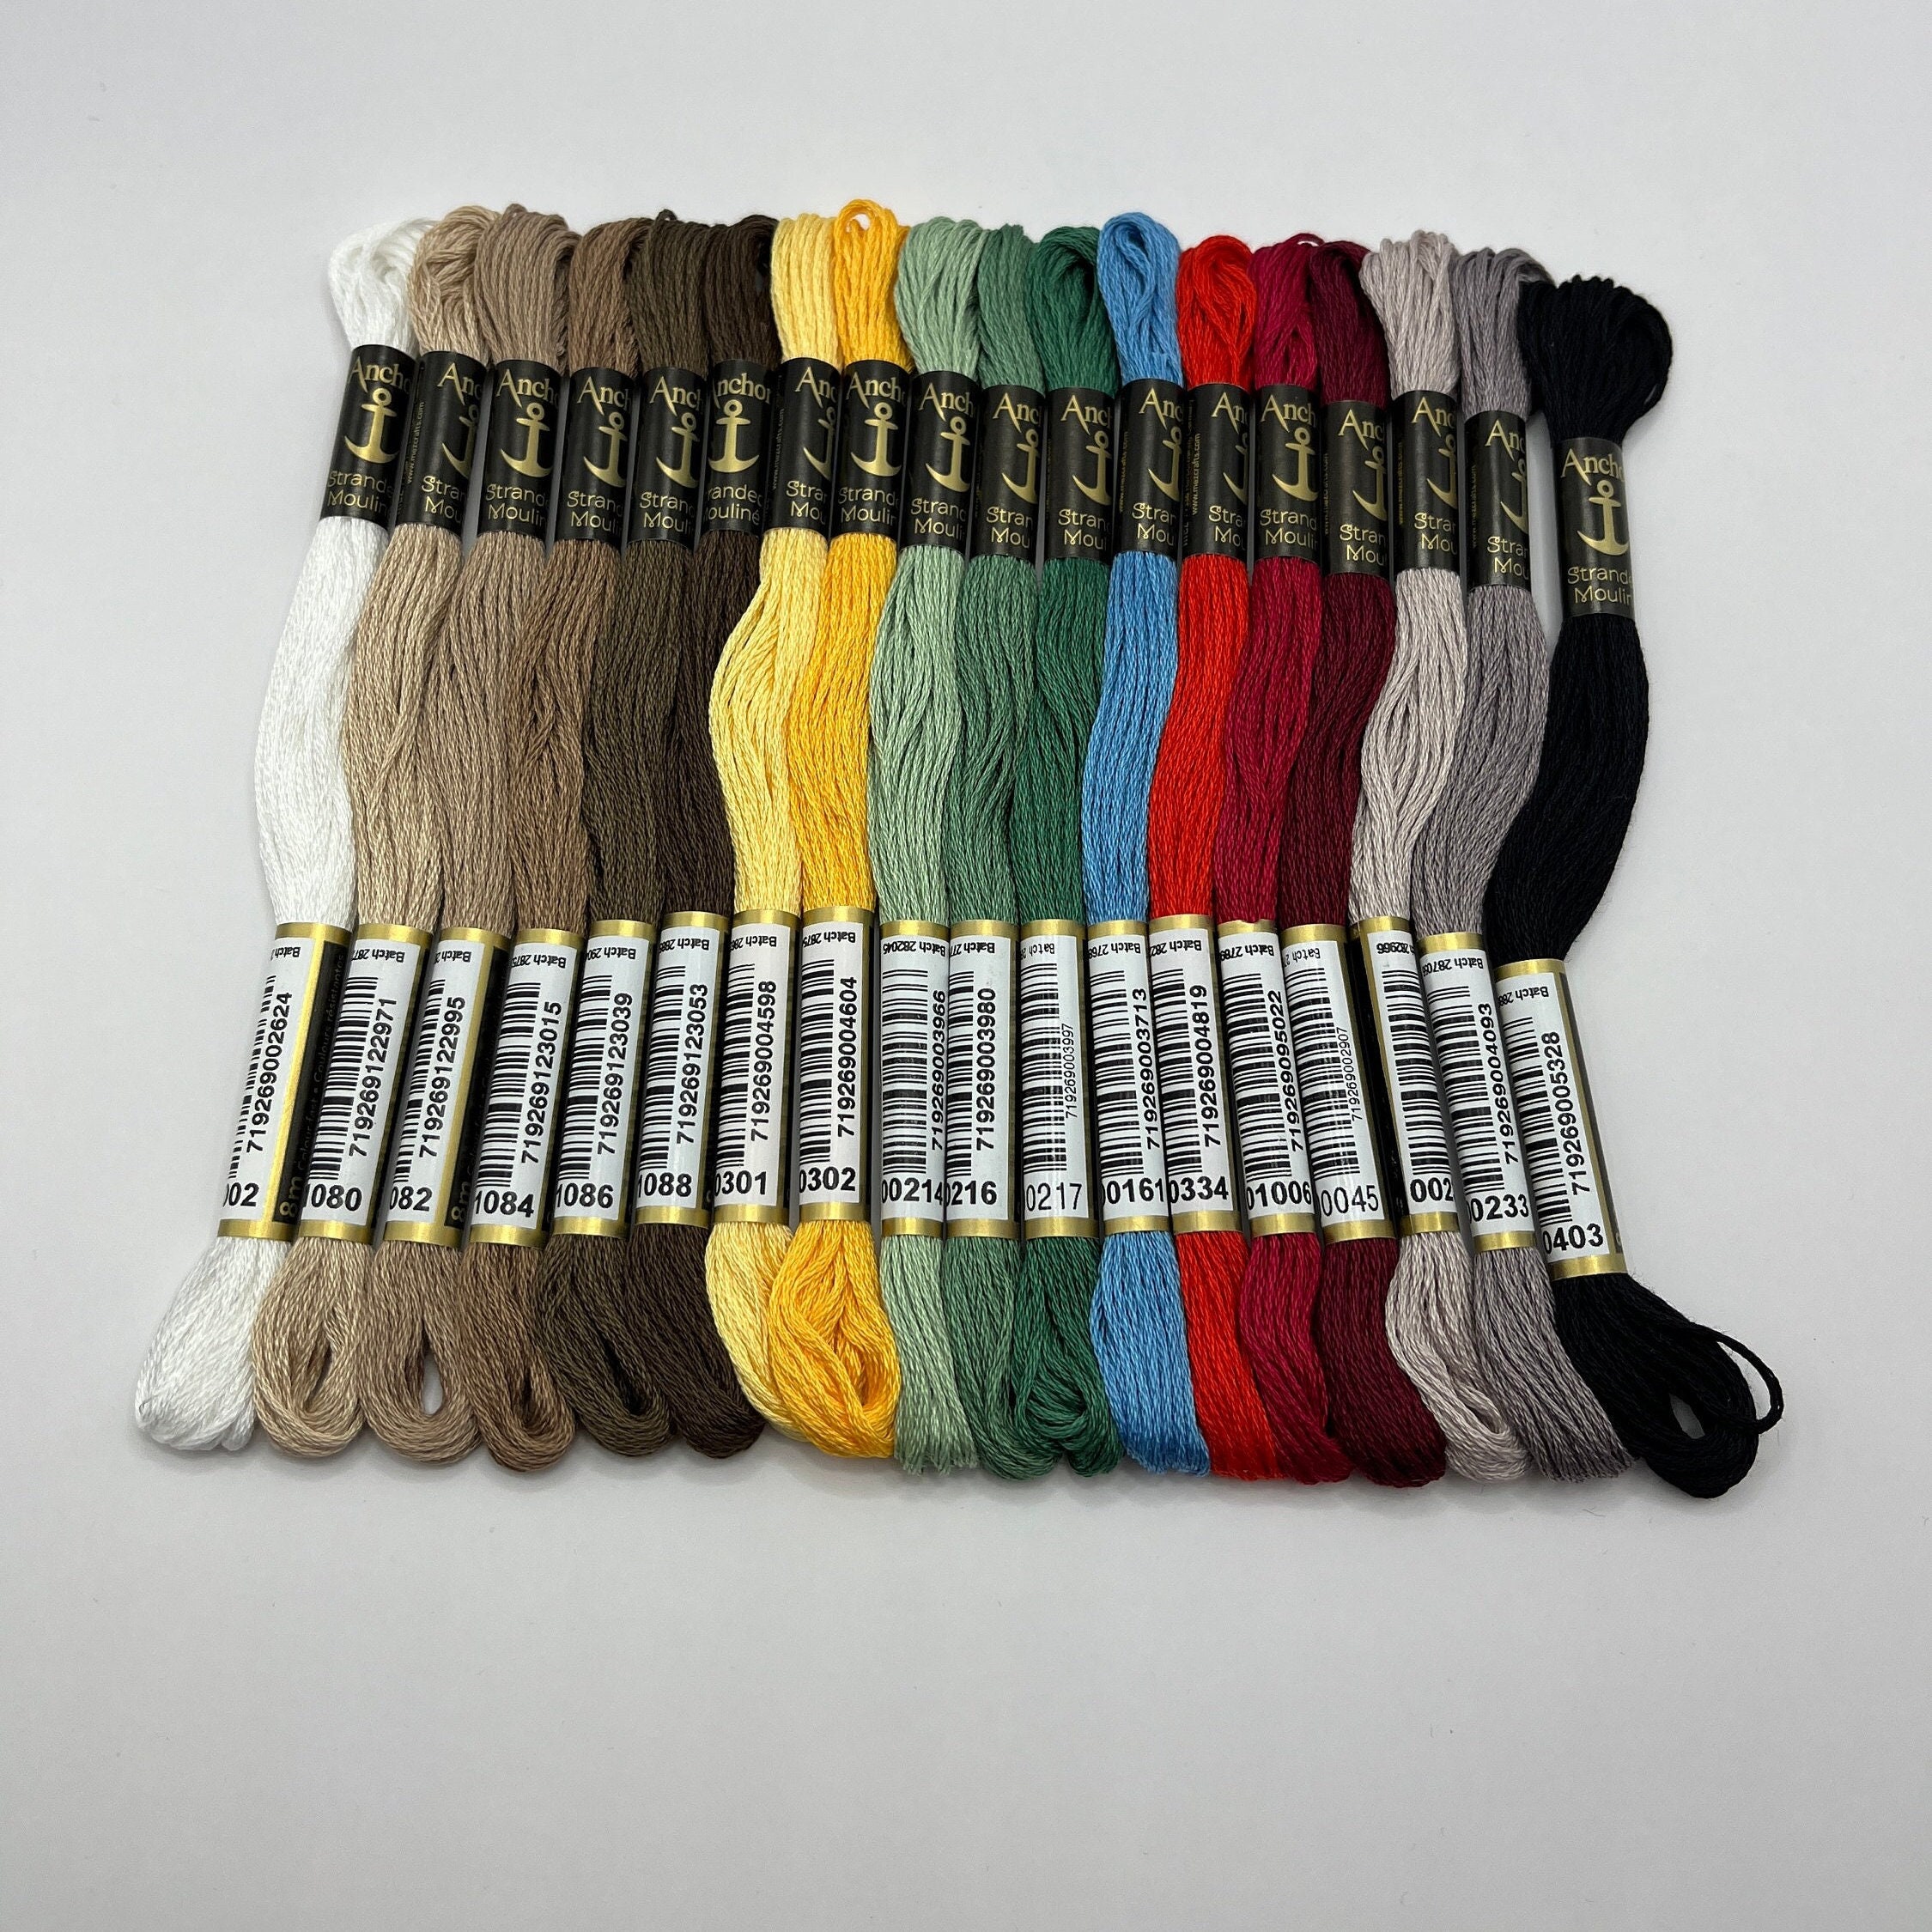 Anchor Embroidery Floss - Pkg of 12, Black 0403